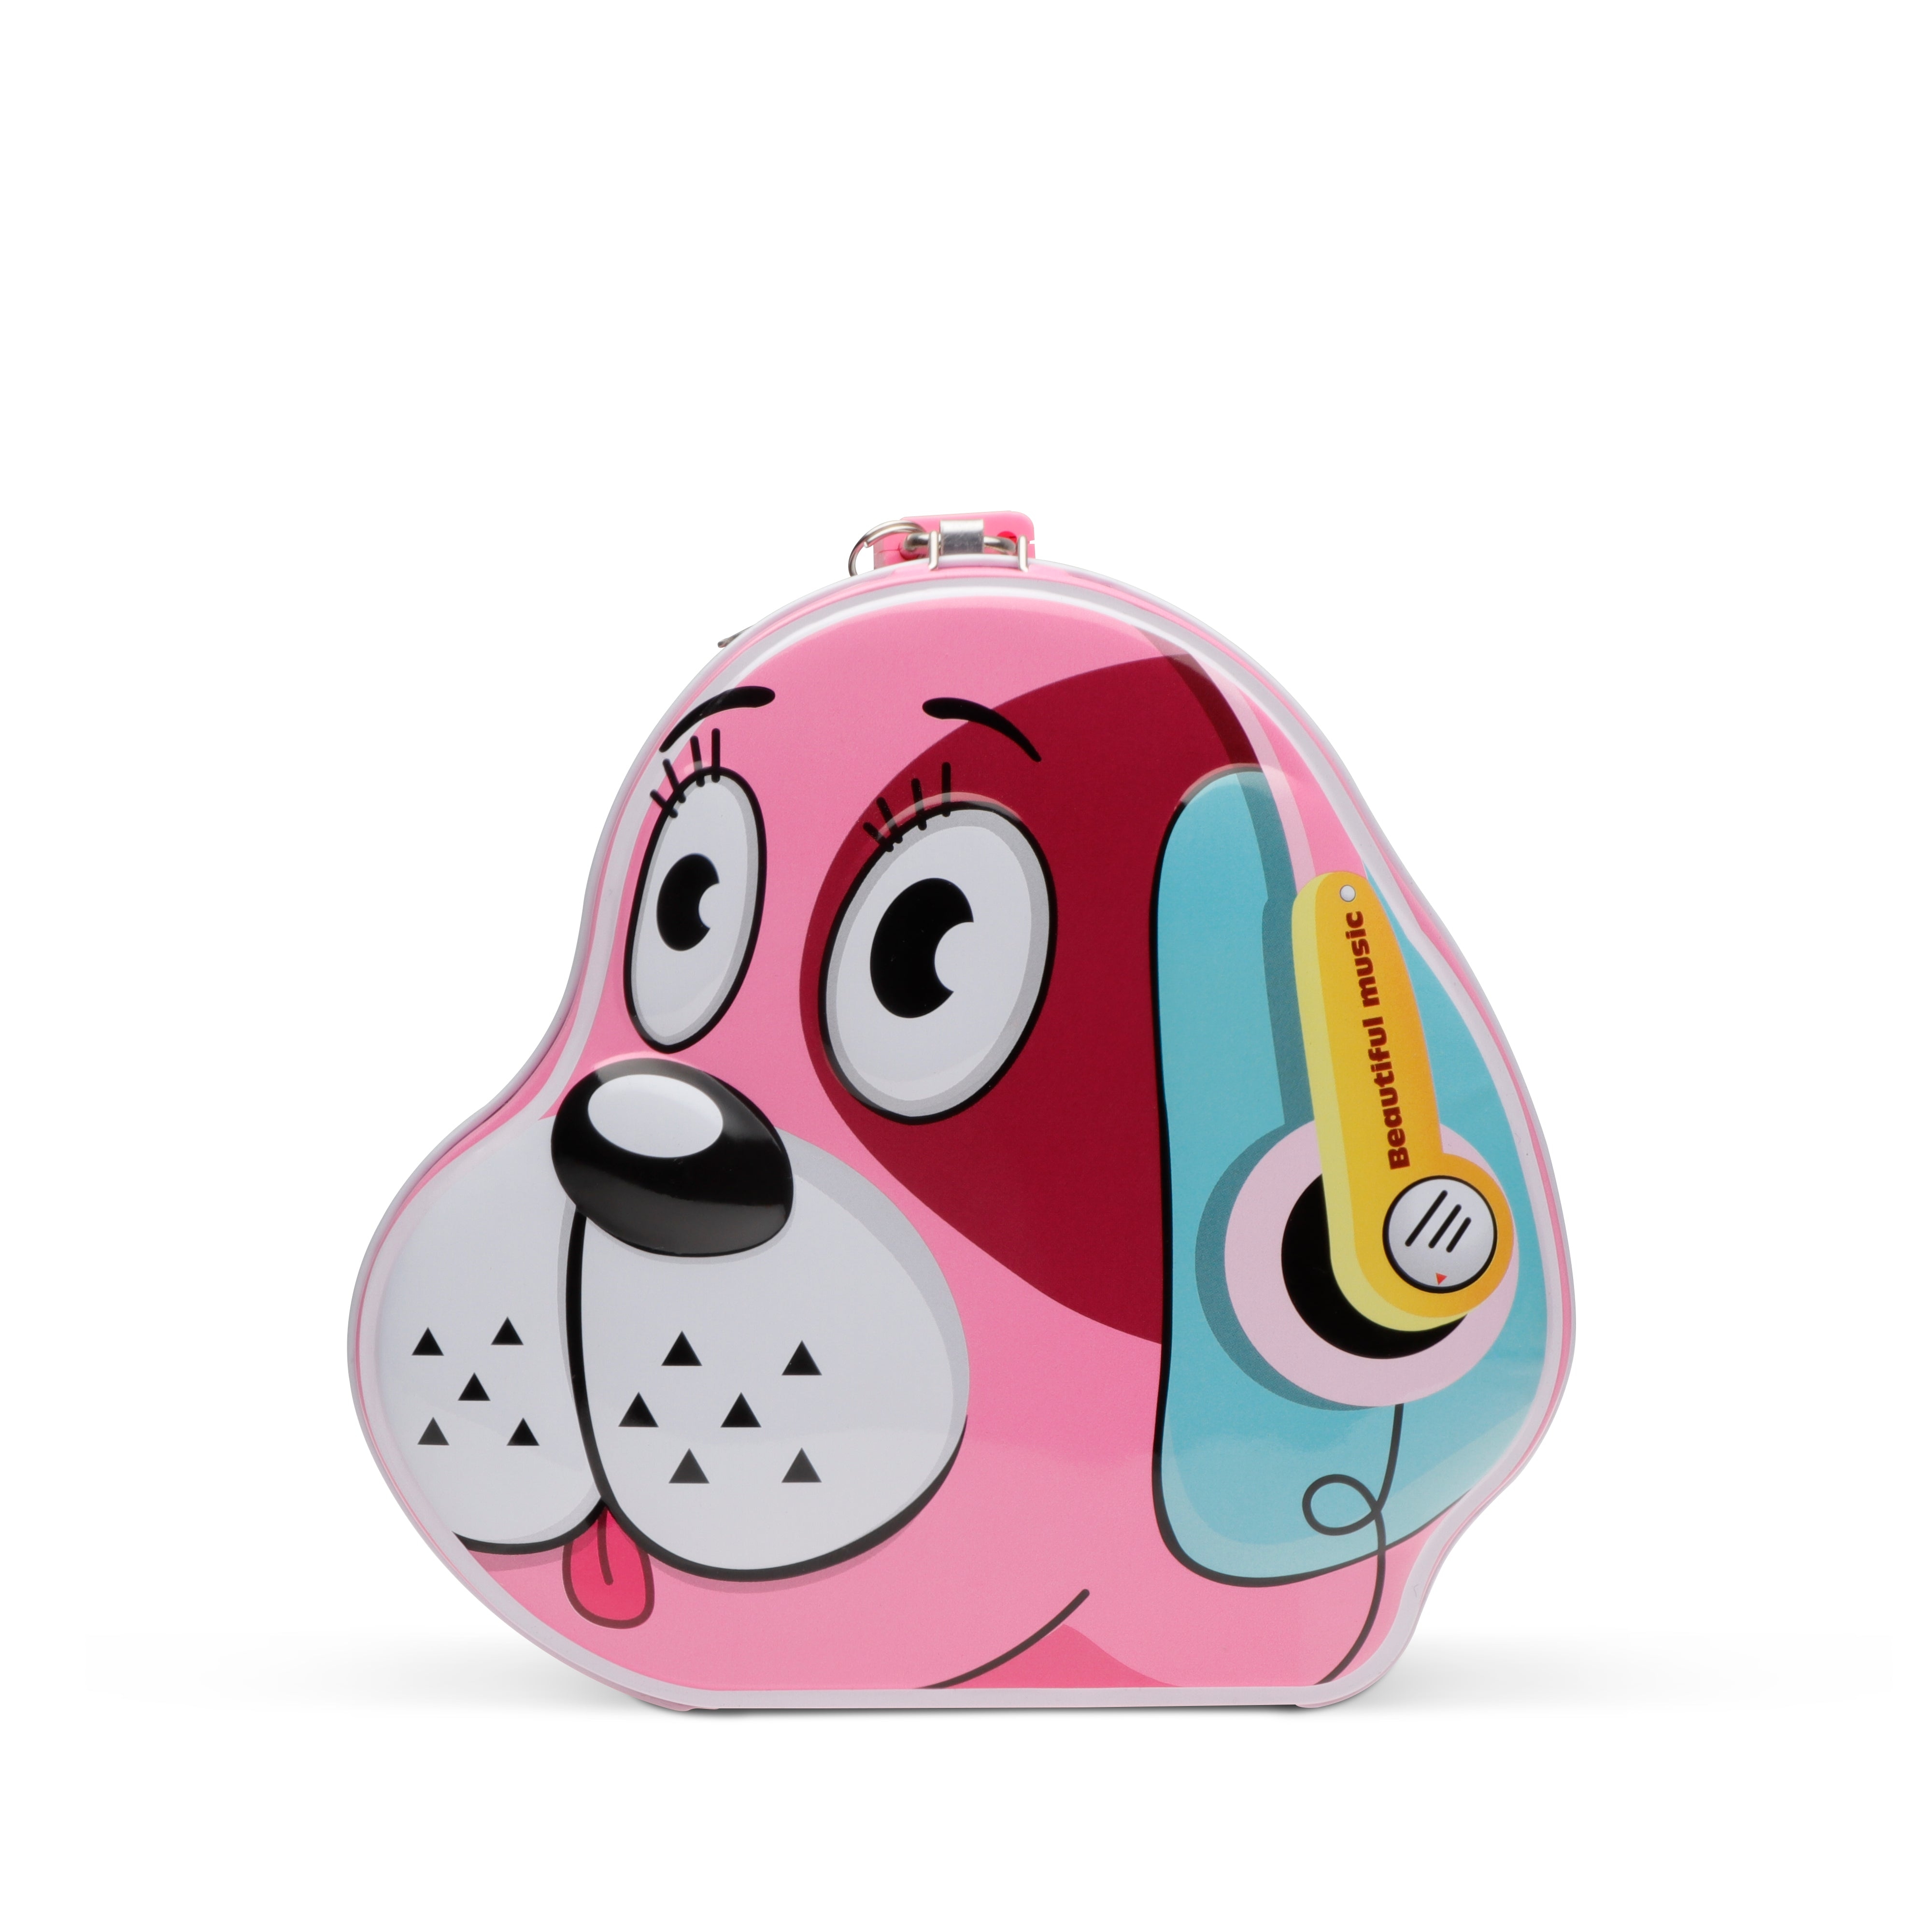 Archies | Archies Piggy Bank -Piggy Bank for Kids, Puppy Shaped Coin Box, Piggybank, Coin Bank, Money Bank, Piggy Bank for Kids Boys and Girls, Money Bank for Kids with Lock-Pink